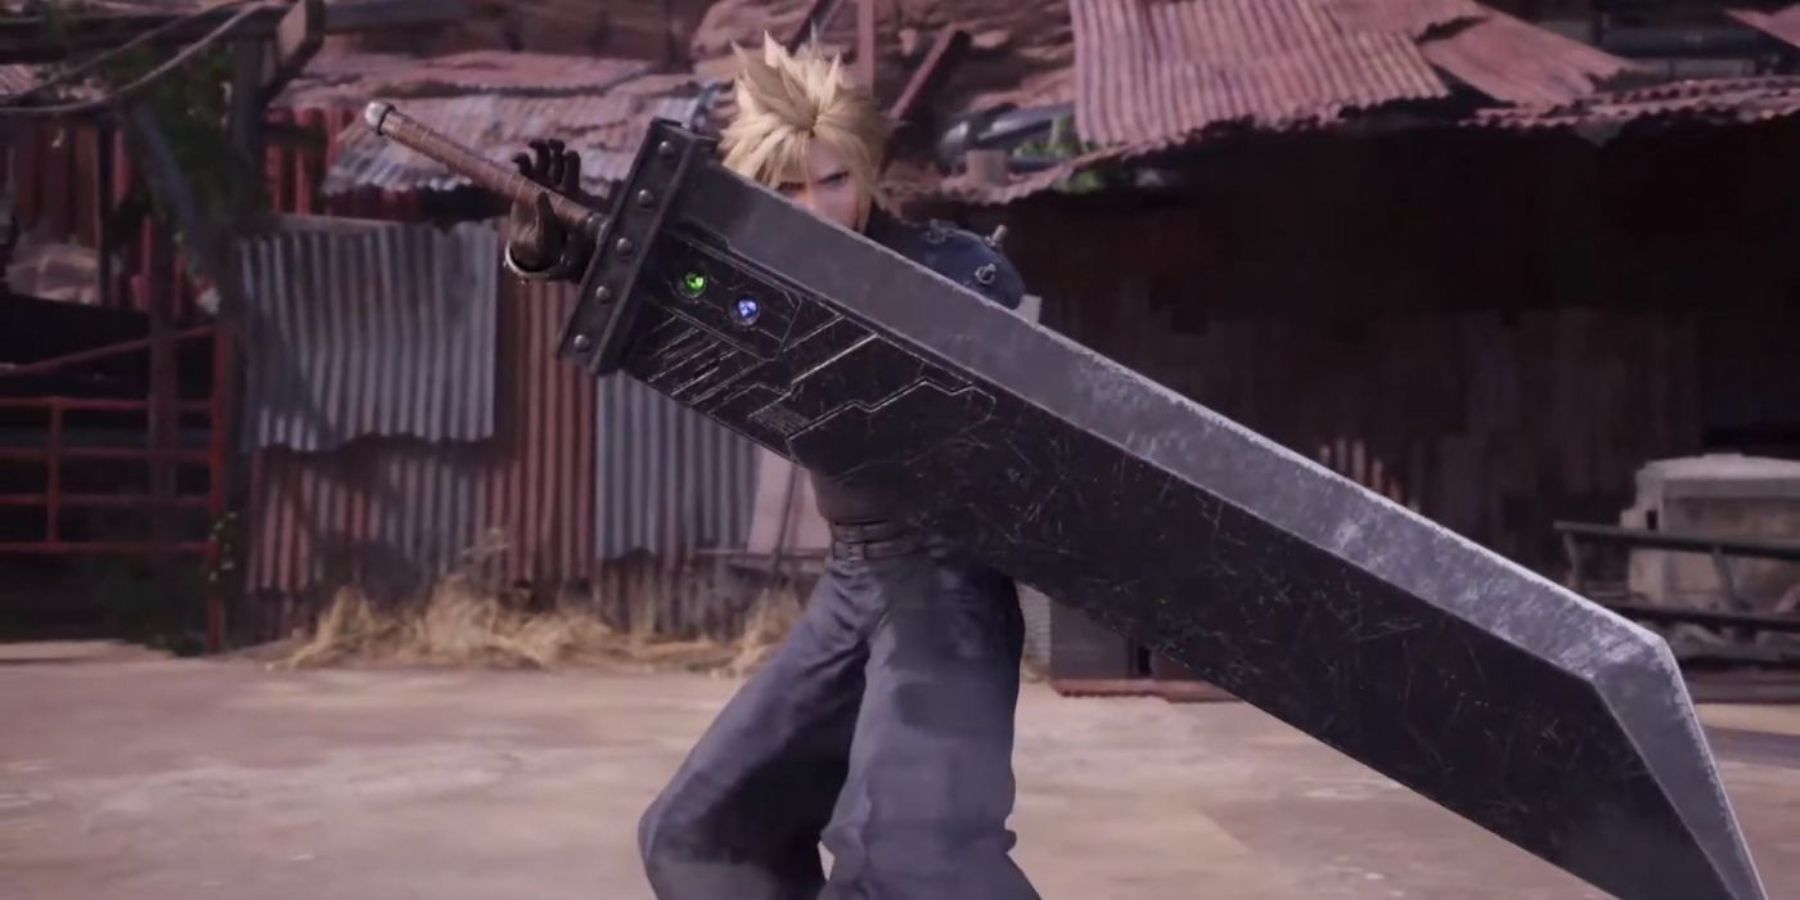 Cloud blocking an attack with the Buster Sword